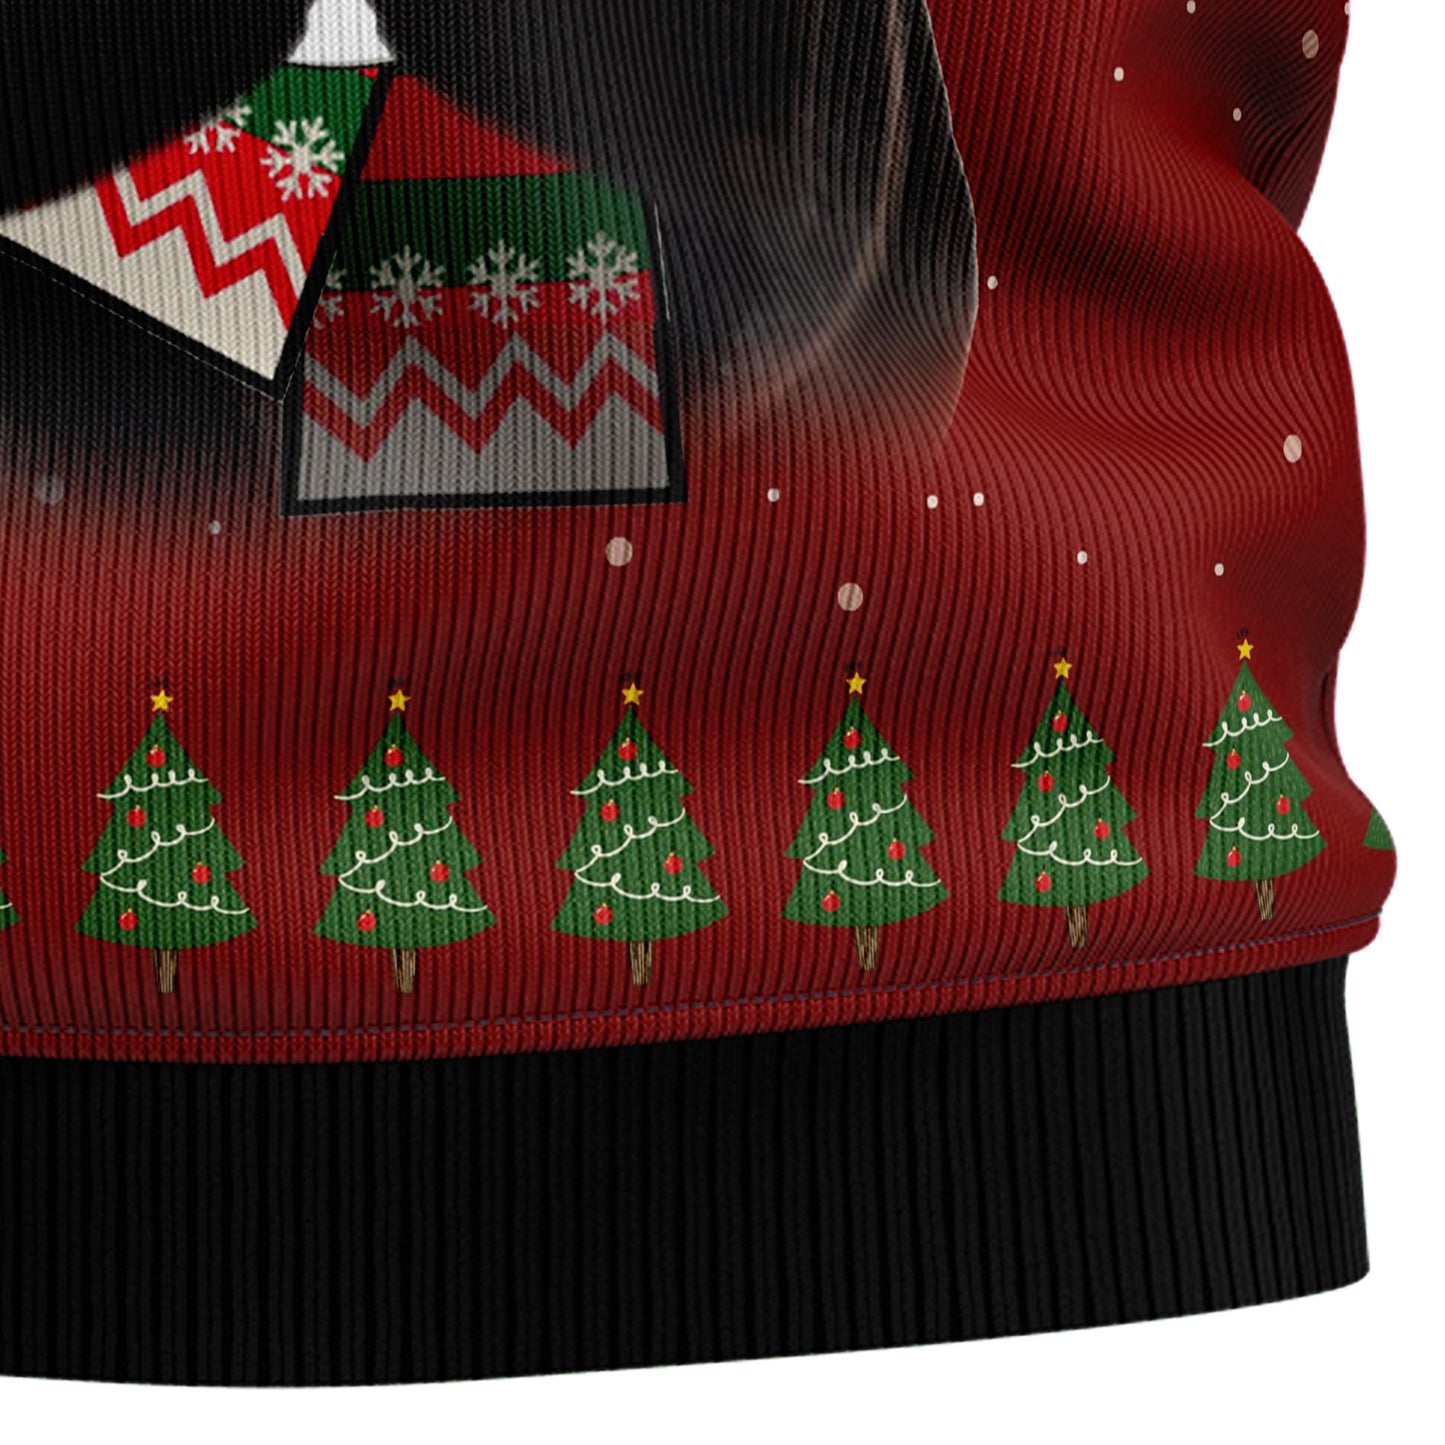 Black Cat Coffee TY1611 Ugly Christmas Sweater